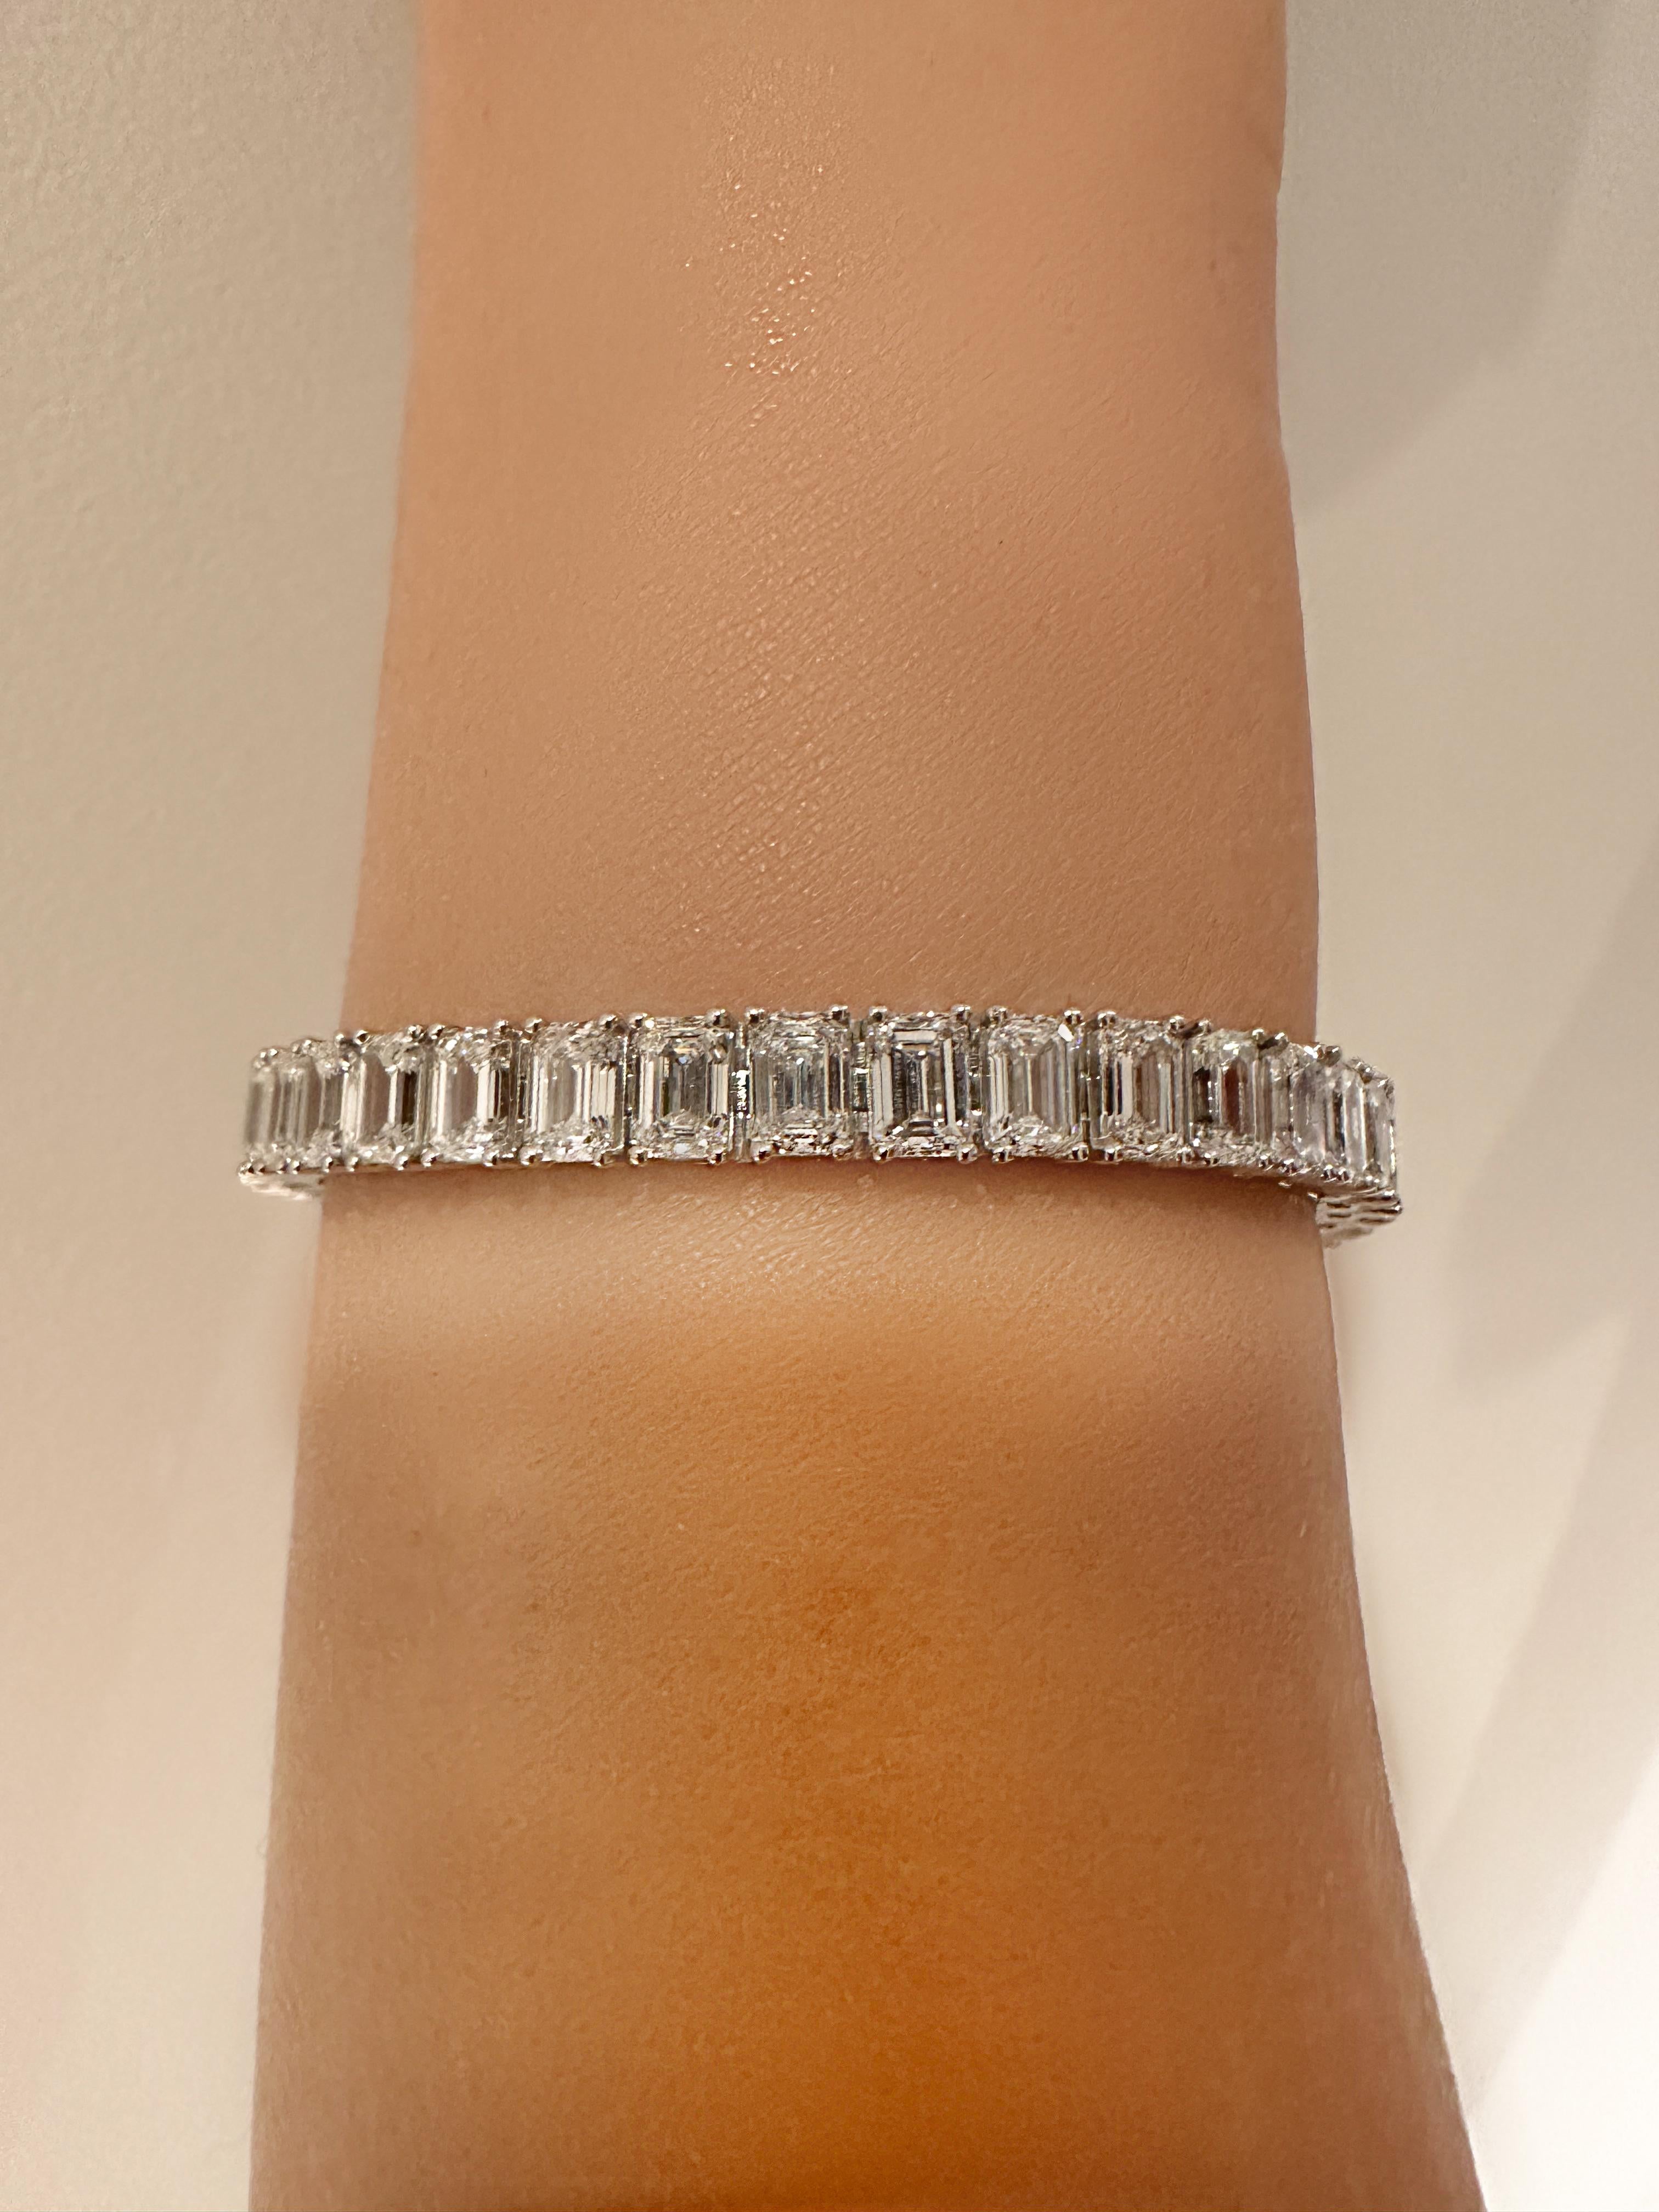 23ct All GIA Certified D-E-F Emerald Cuts Diamond Tennis Bracelet in Platinum In New Condition For Sale In New York, NY